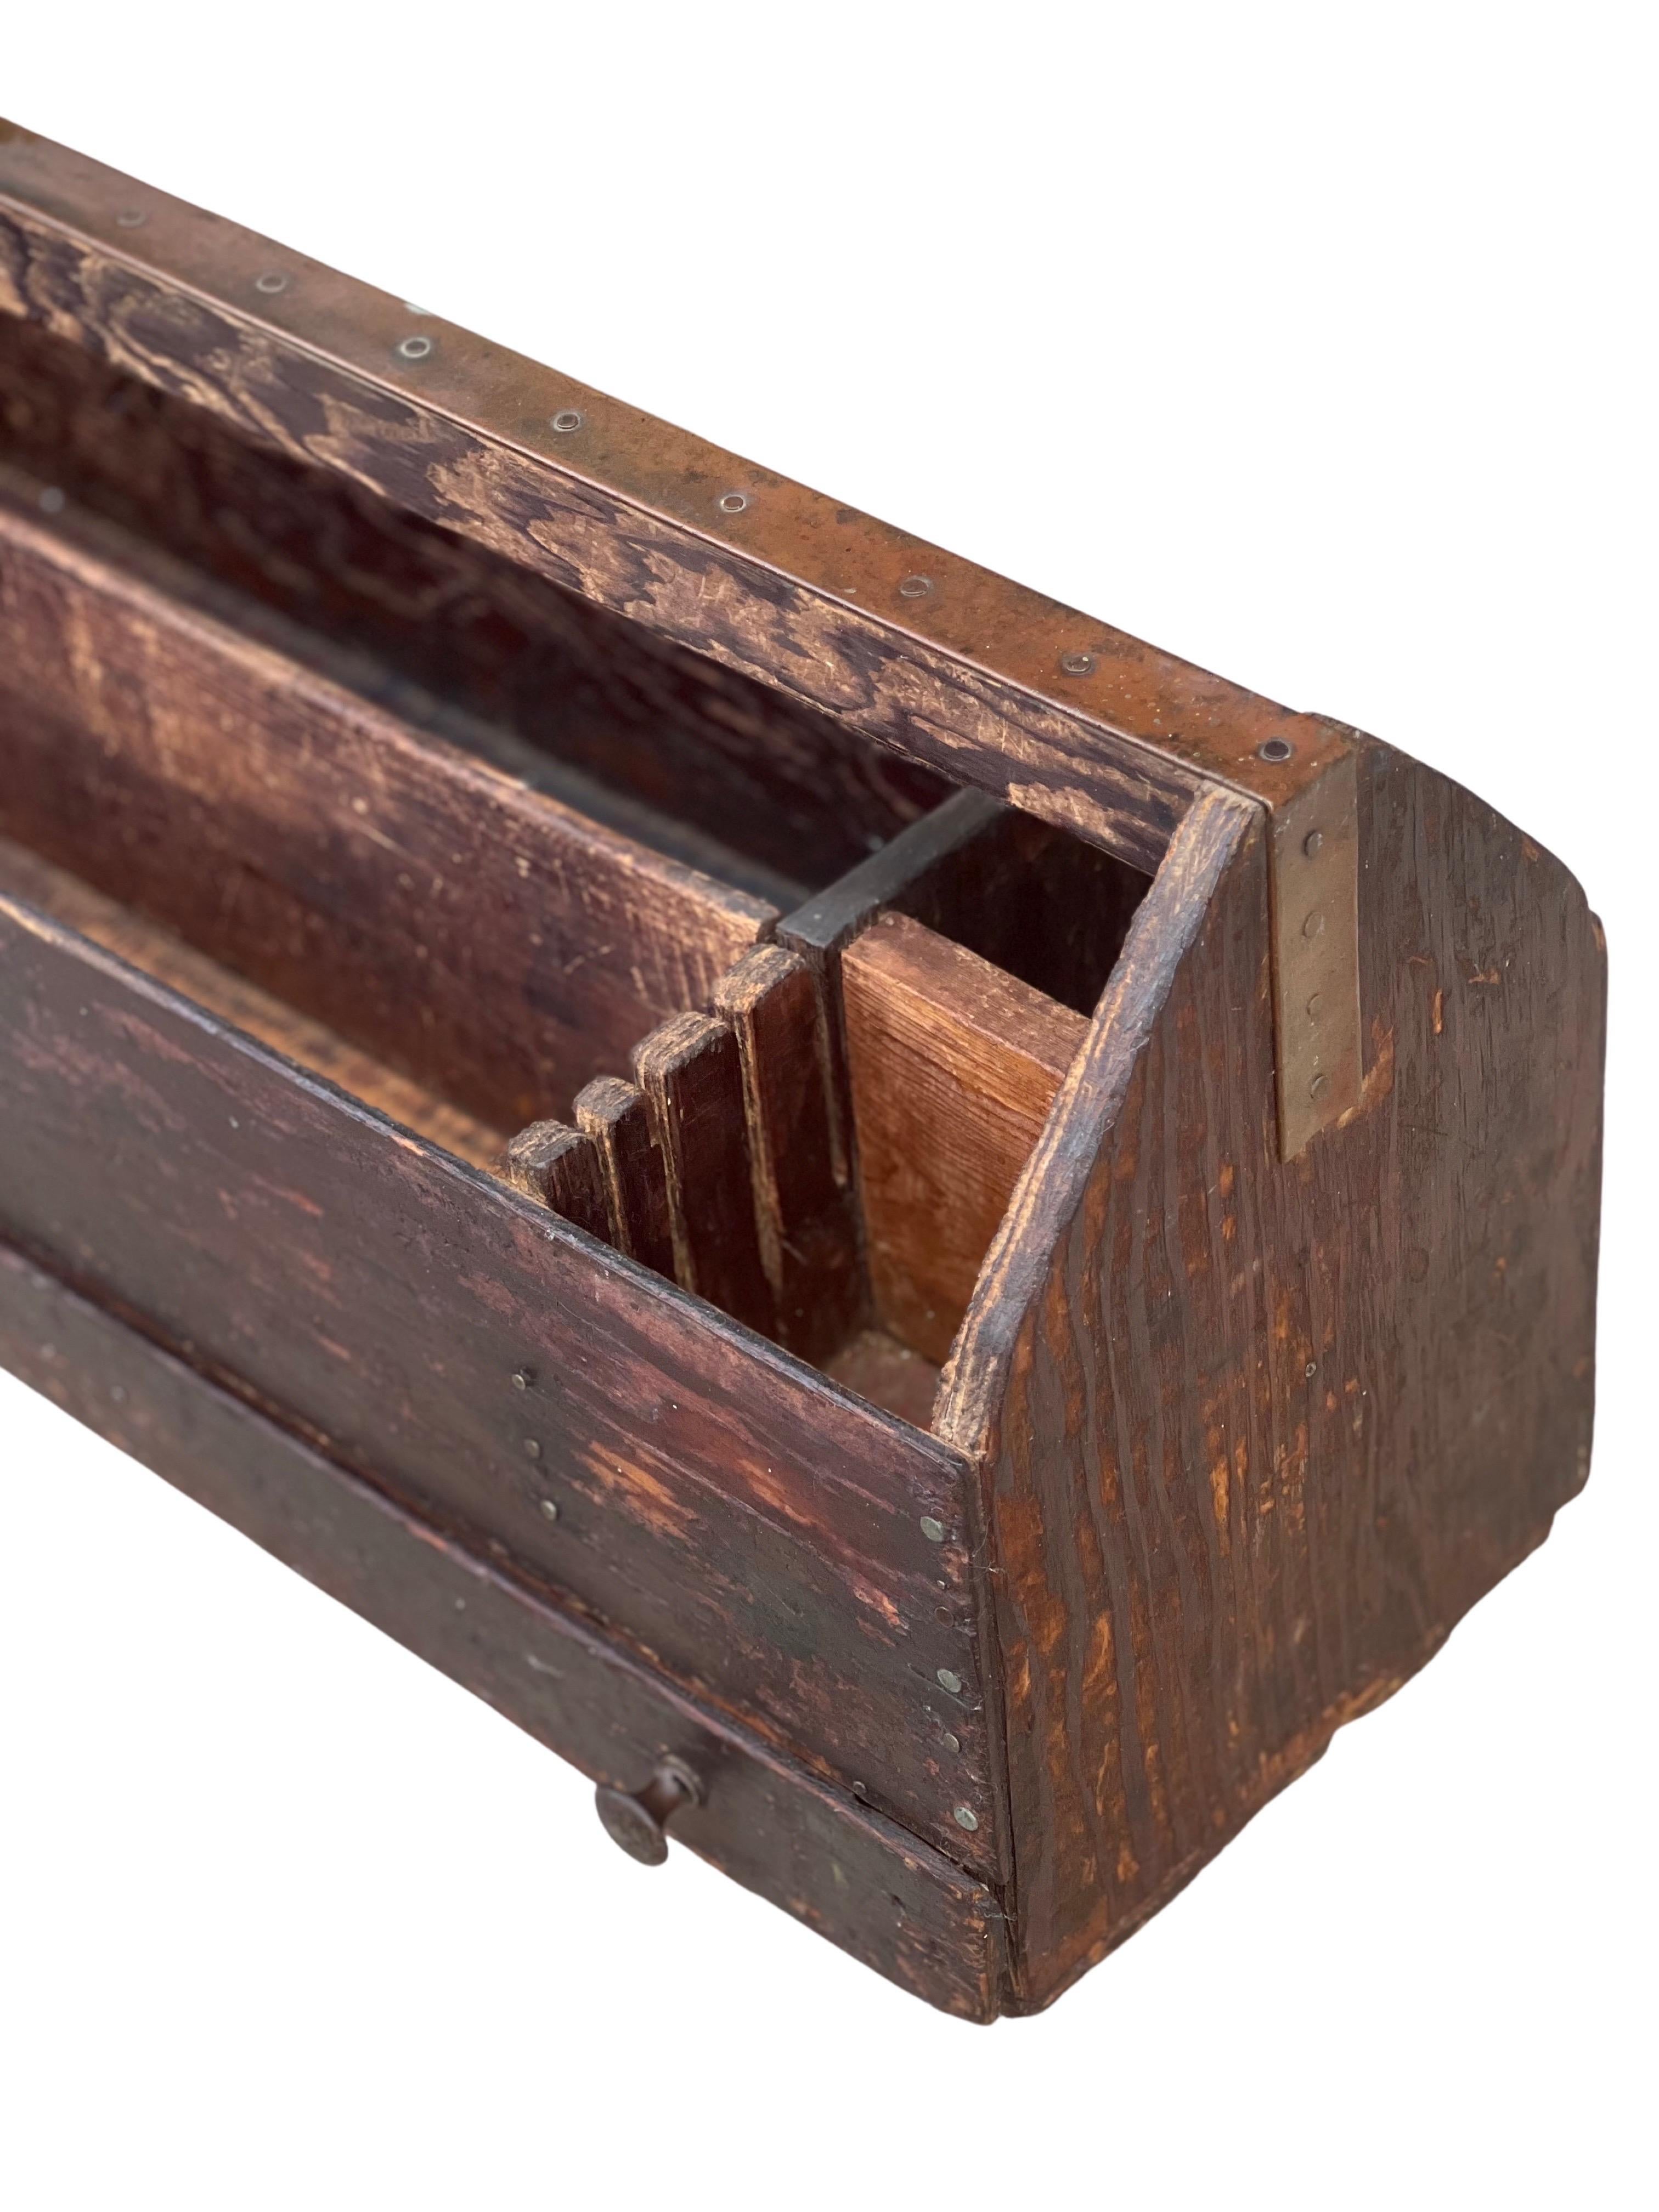 Antique Handcrafted Primitive Pine Tool Carrier or All-Purpose Caddy with Drawer For Sale 4